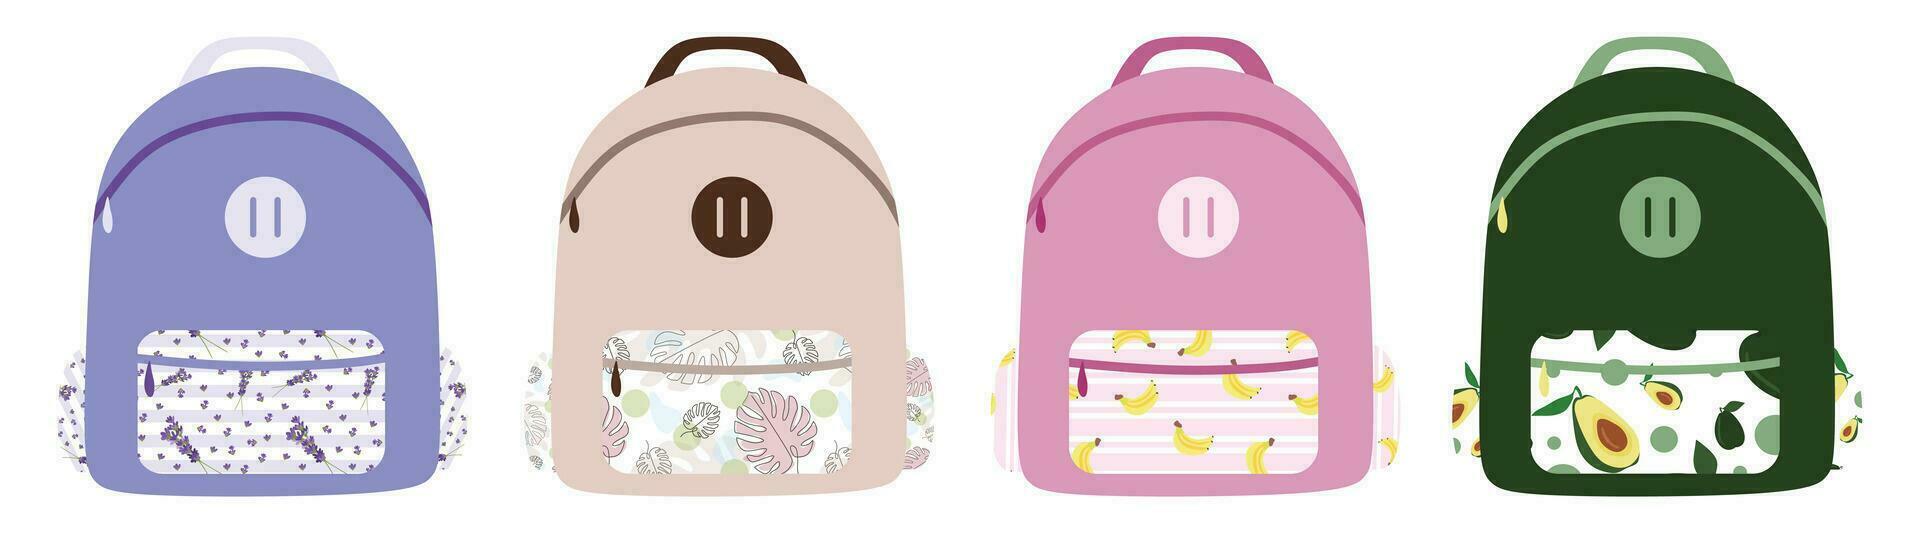 Street backpacks set. School backpack with Printed pocket. Flat style or cartoon Collection of Travel bags isolated on white background. Vector illustration for Card and Logo Design. Front view.